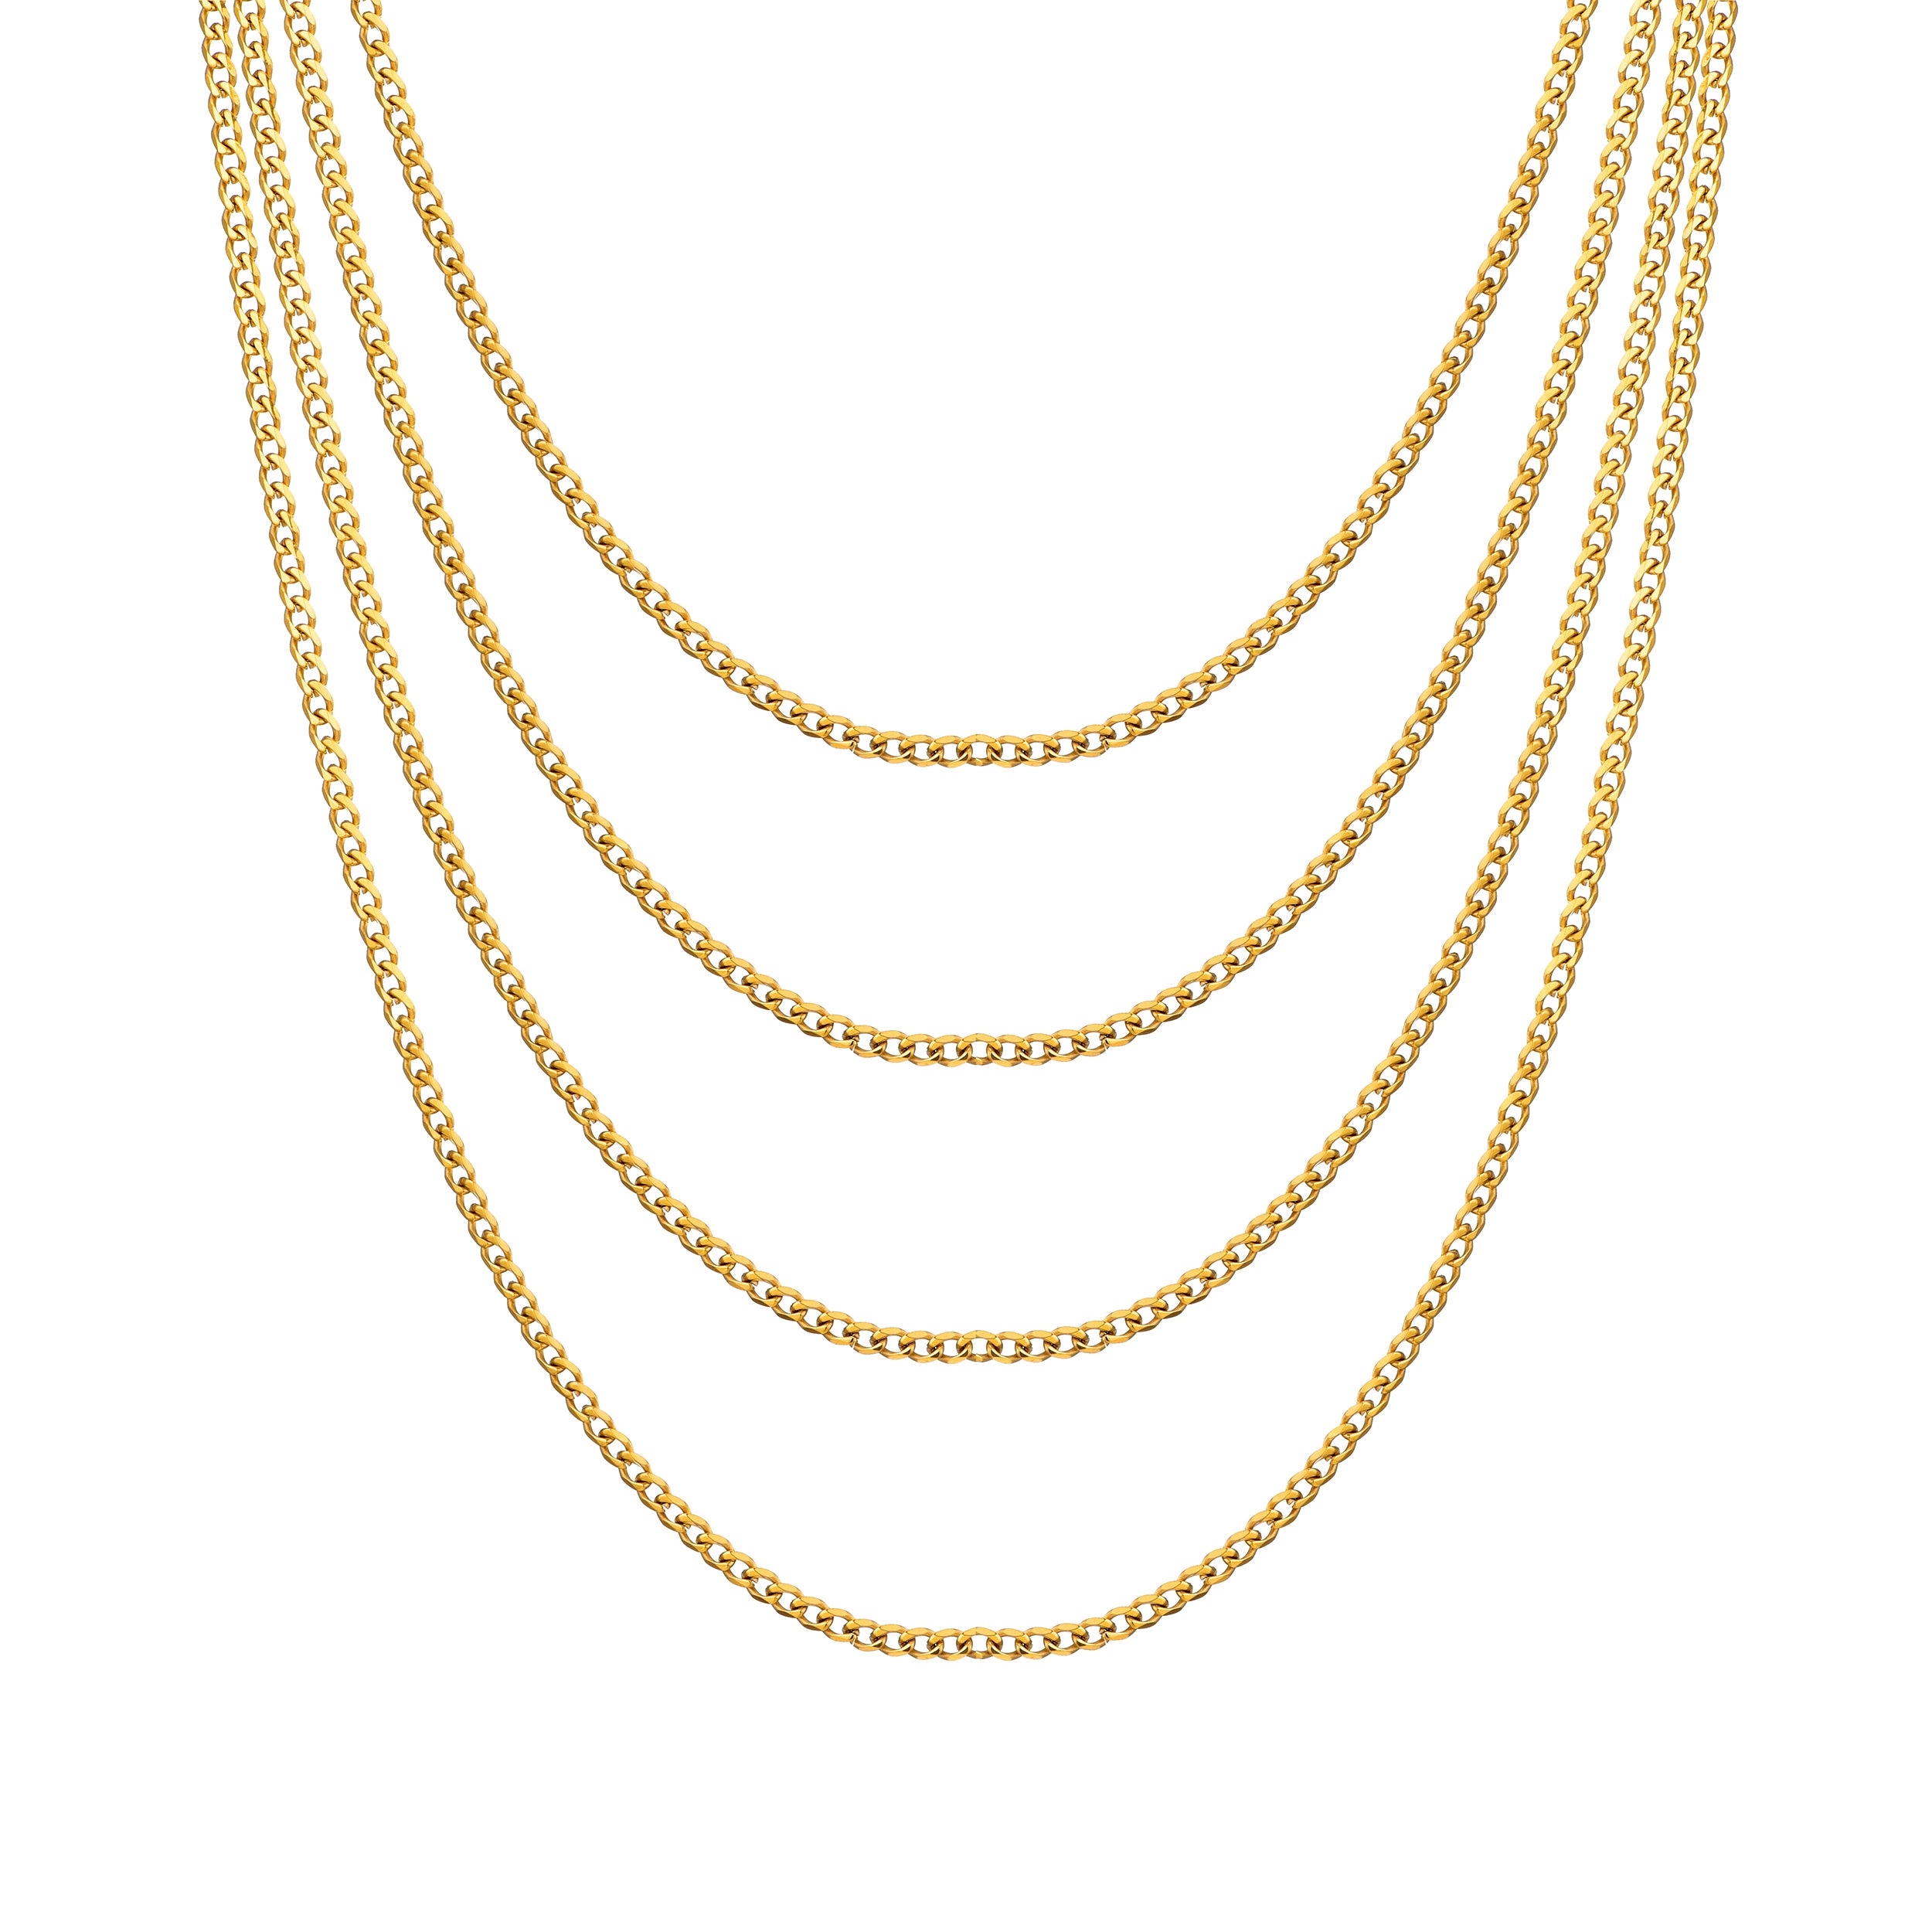 Men's 3mm Gold Plated Steel 18-24 Inch Curb Chain Necklace by Philip Jones Jewellery